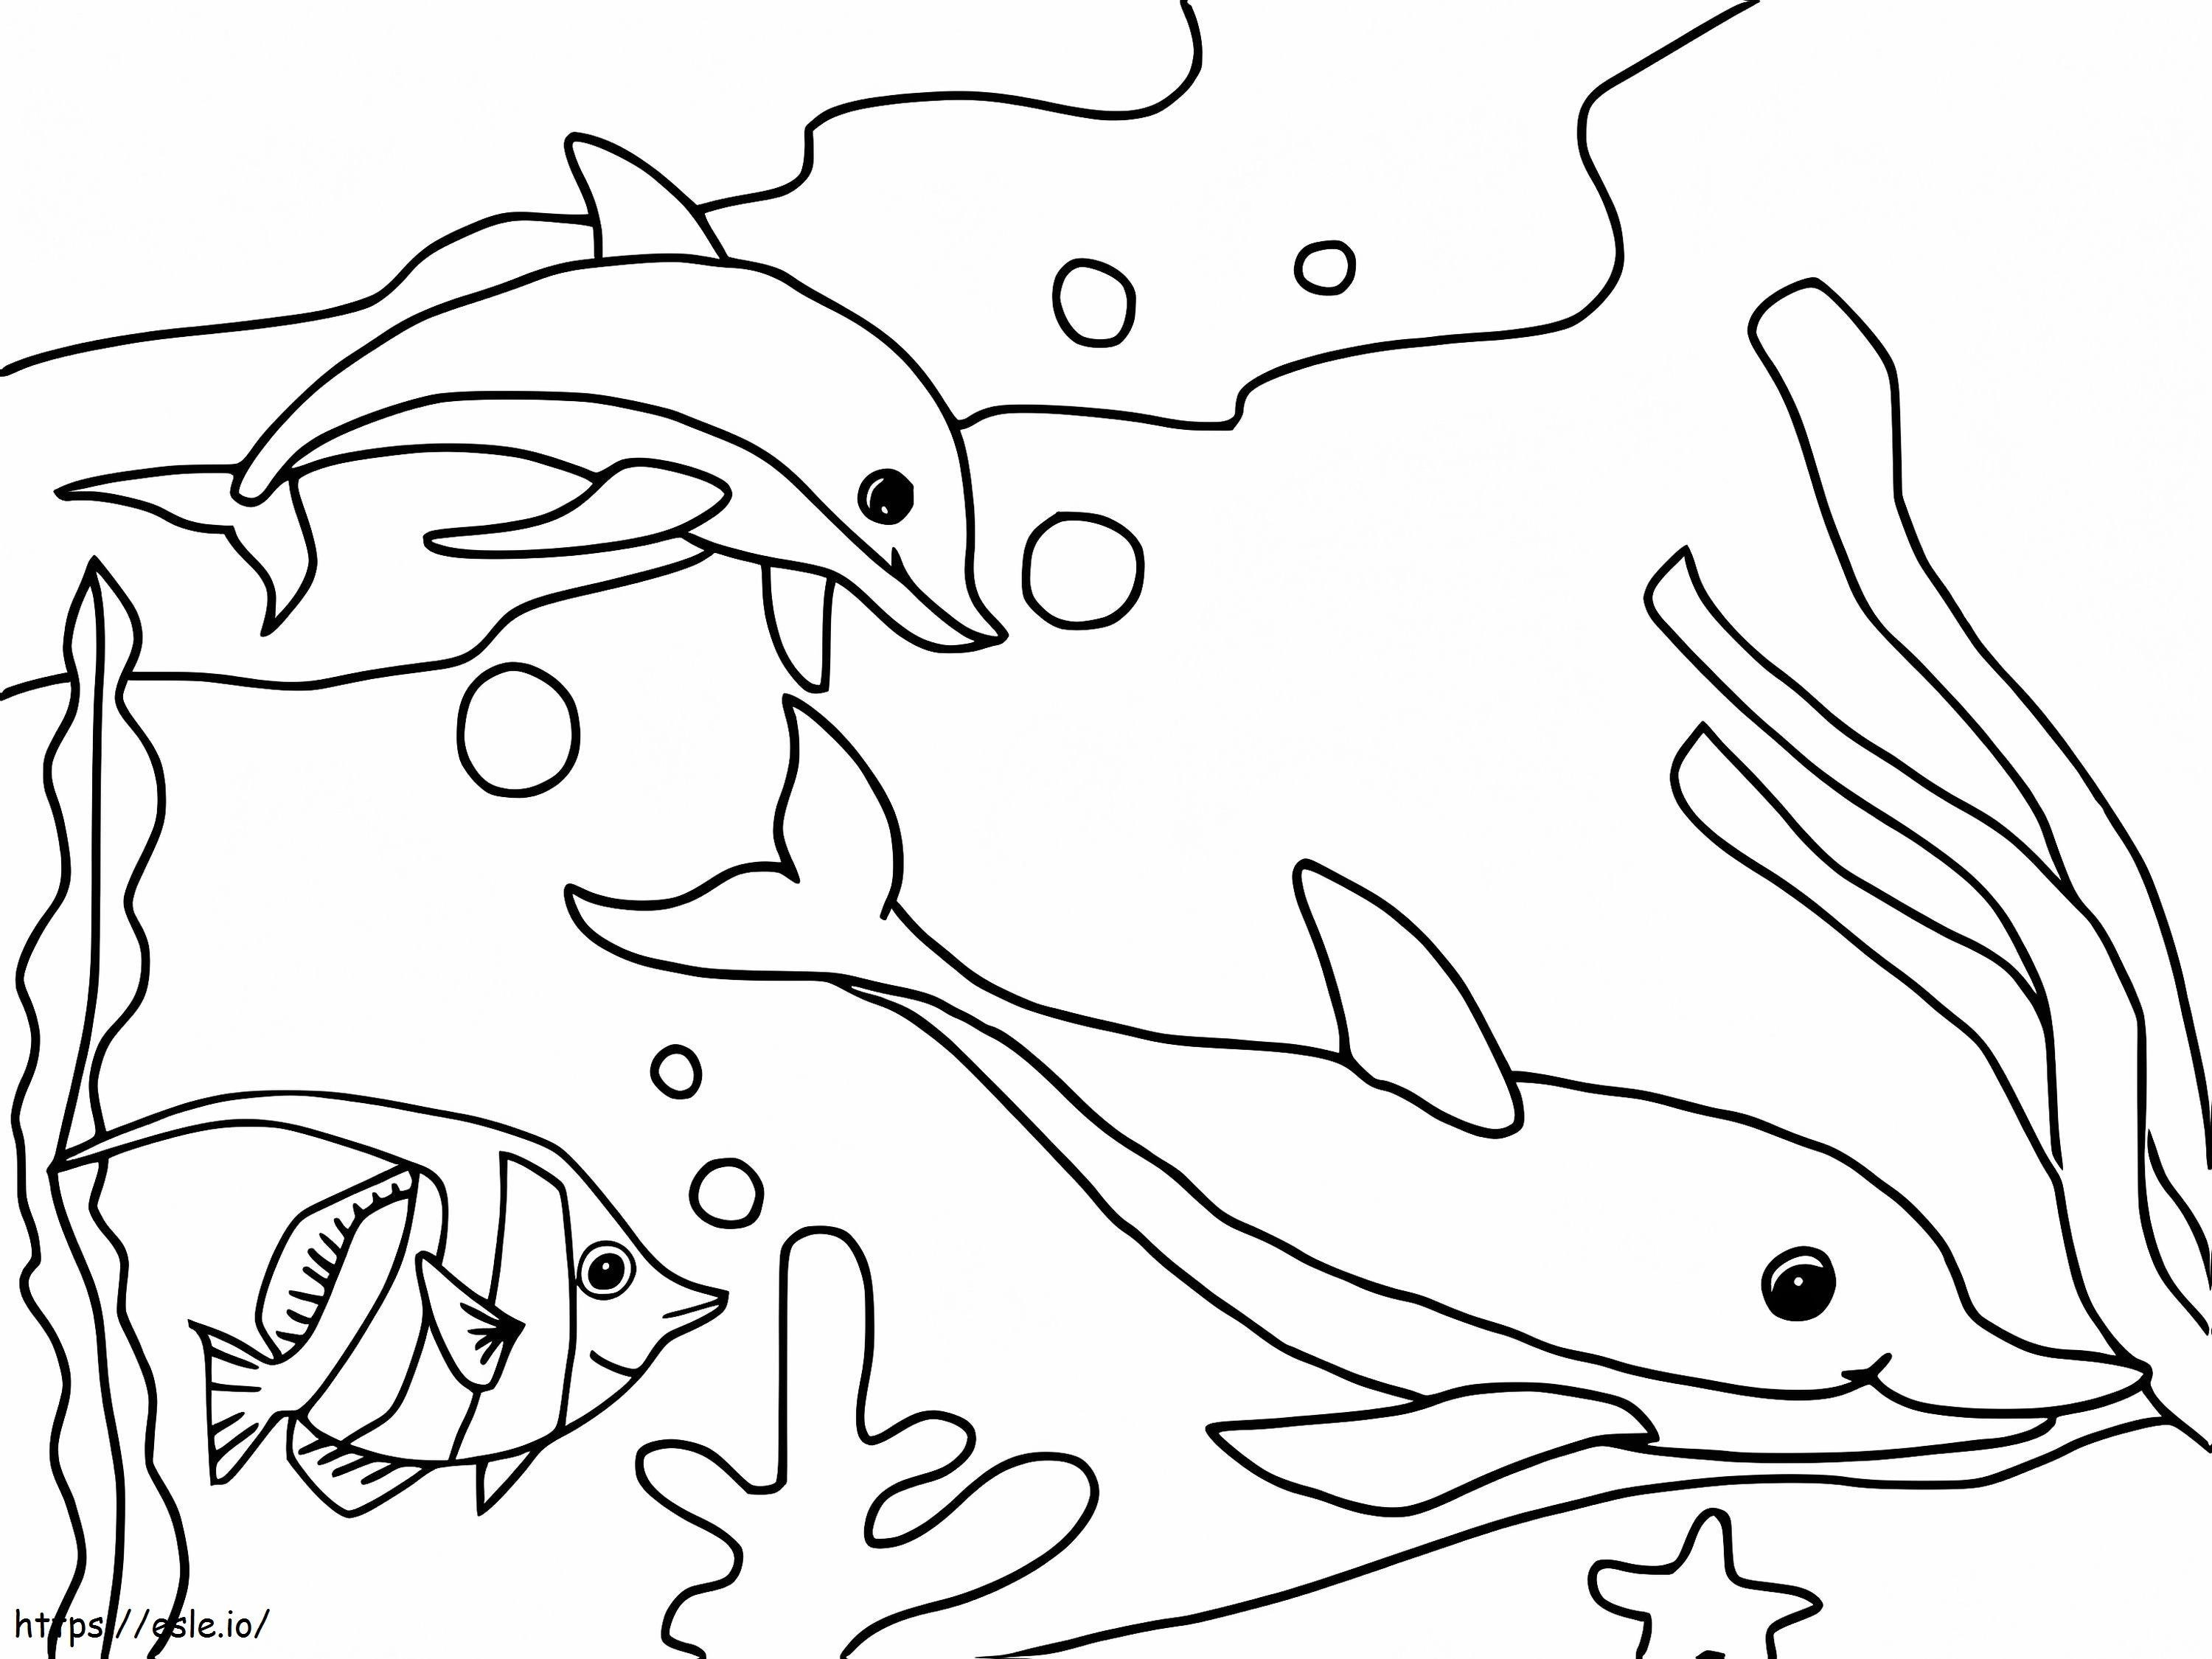 Dolphins In The Ocean coloring page